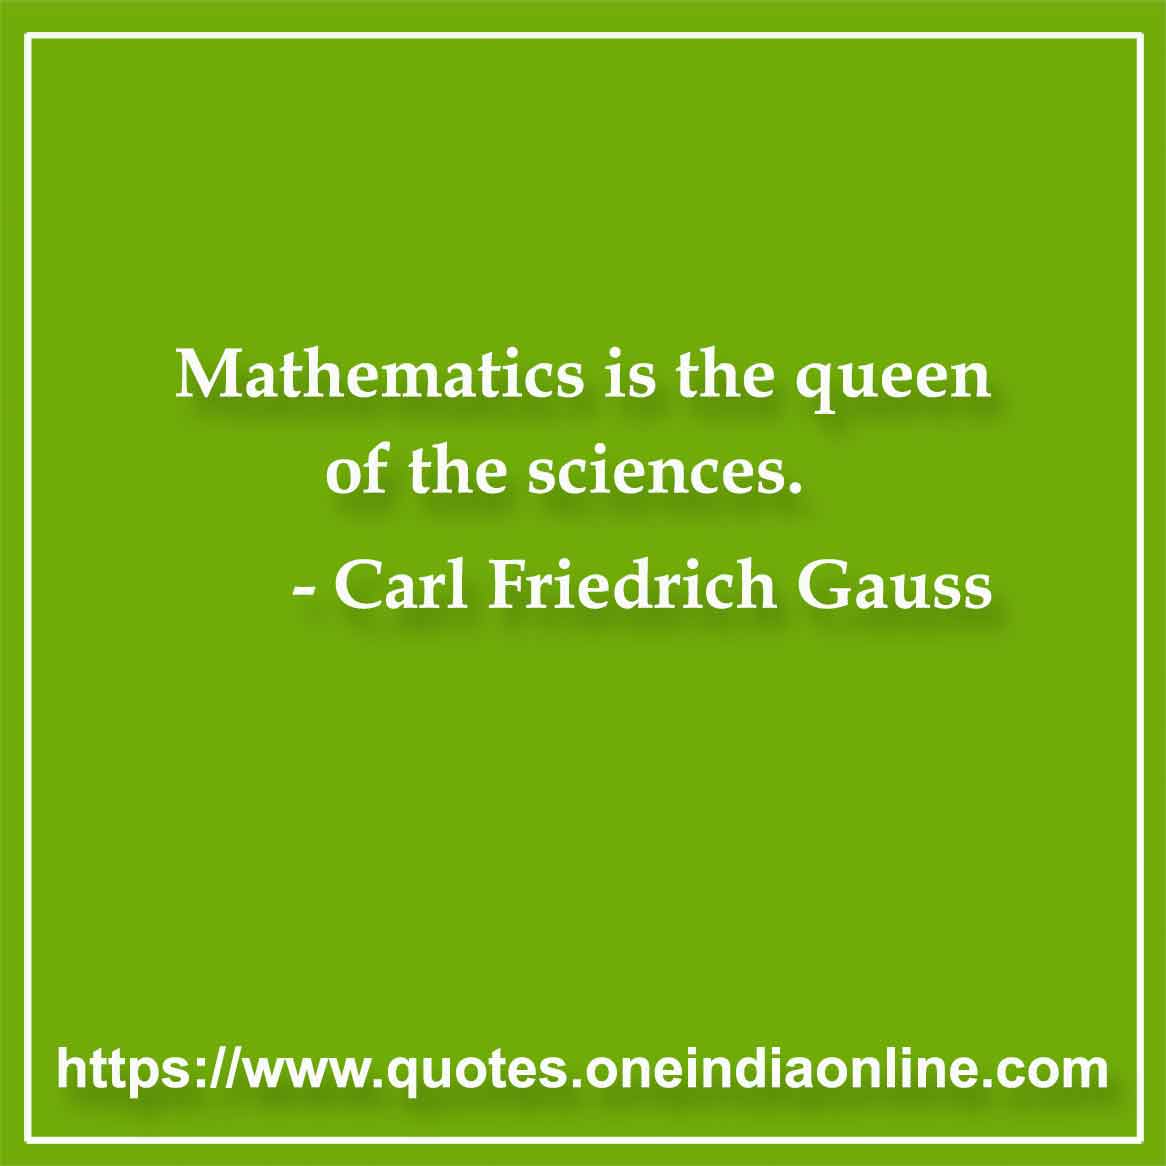 Mathematics is the queen of the sciences.

- Mathematics Quotes by Carl Friedrich Gauss 